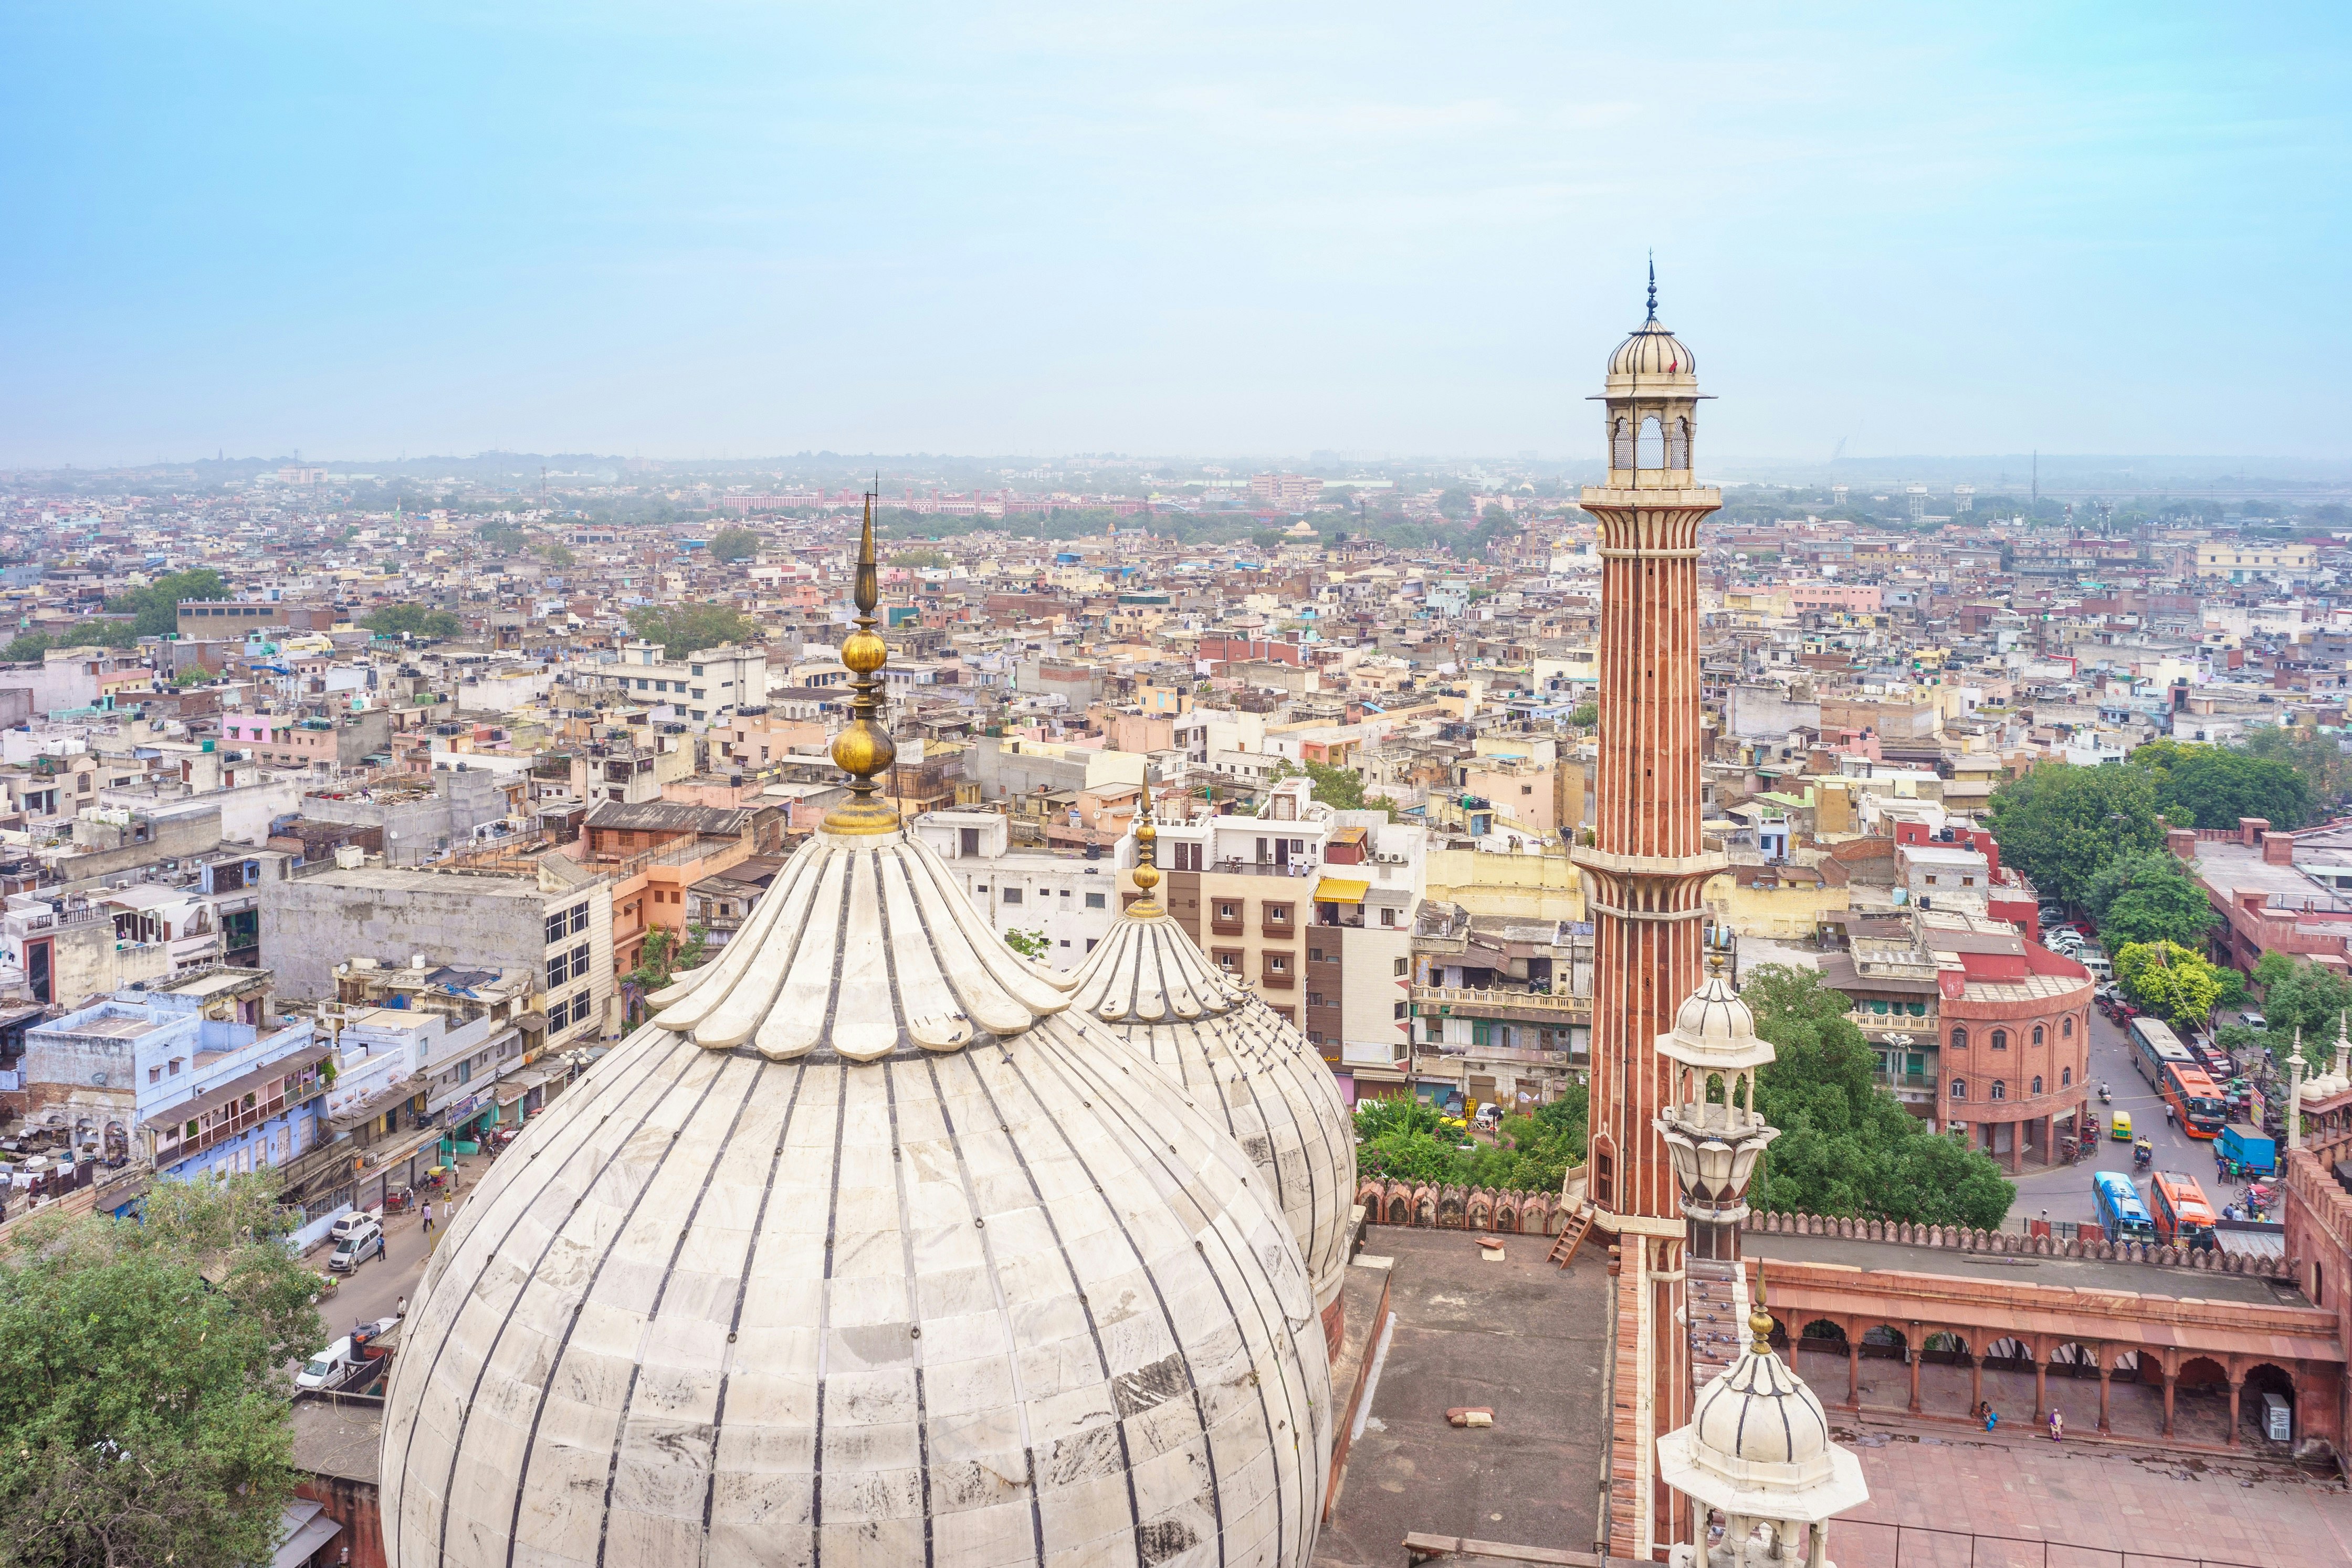 A view out from the minaret of Jama Masjid mosque in Old Delhi. From the vantage point the mosque's domed roof is visible, as are the hundreds of rooftops of the buildings that make up Old Delhi.